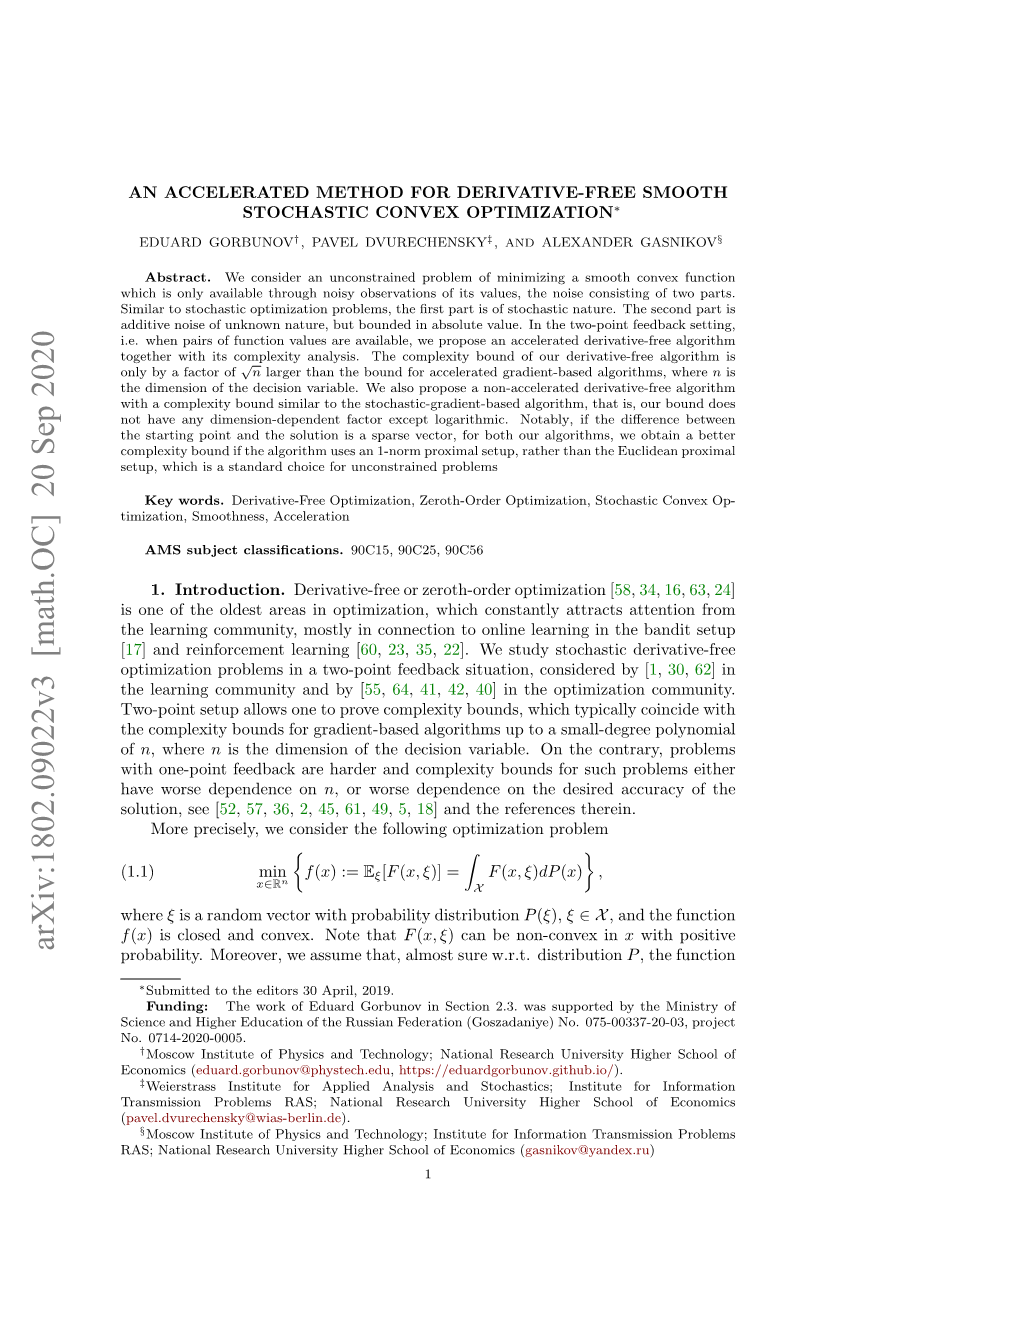 An Accelerated Method for Derivative-Free Smooth Stochastic Convex Optimization∗